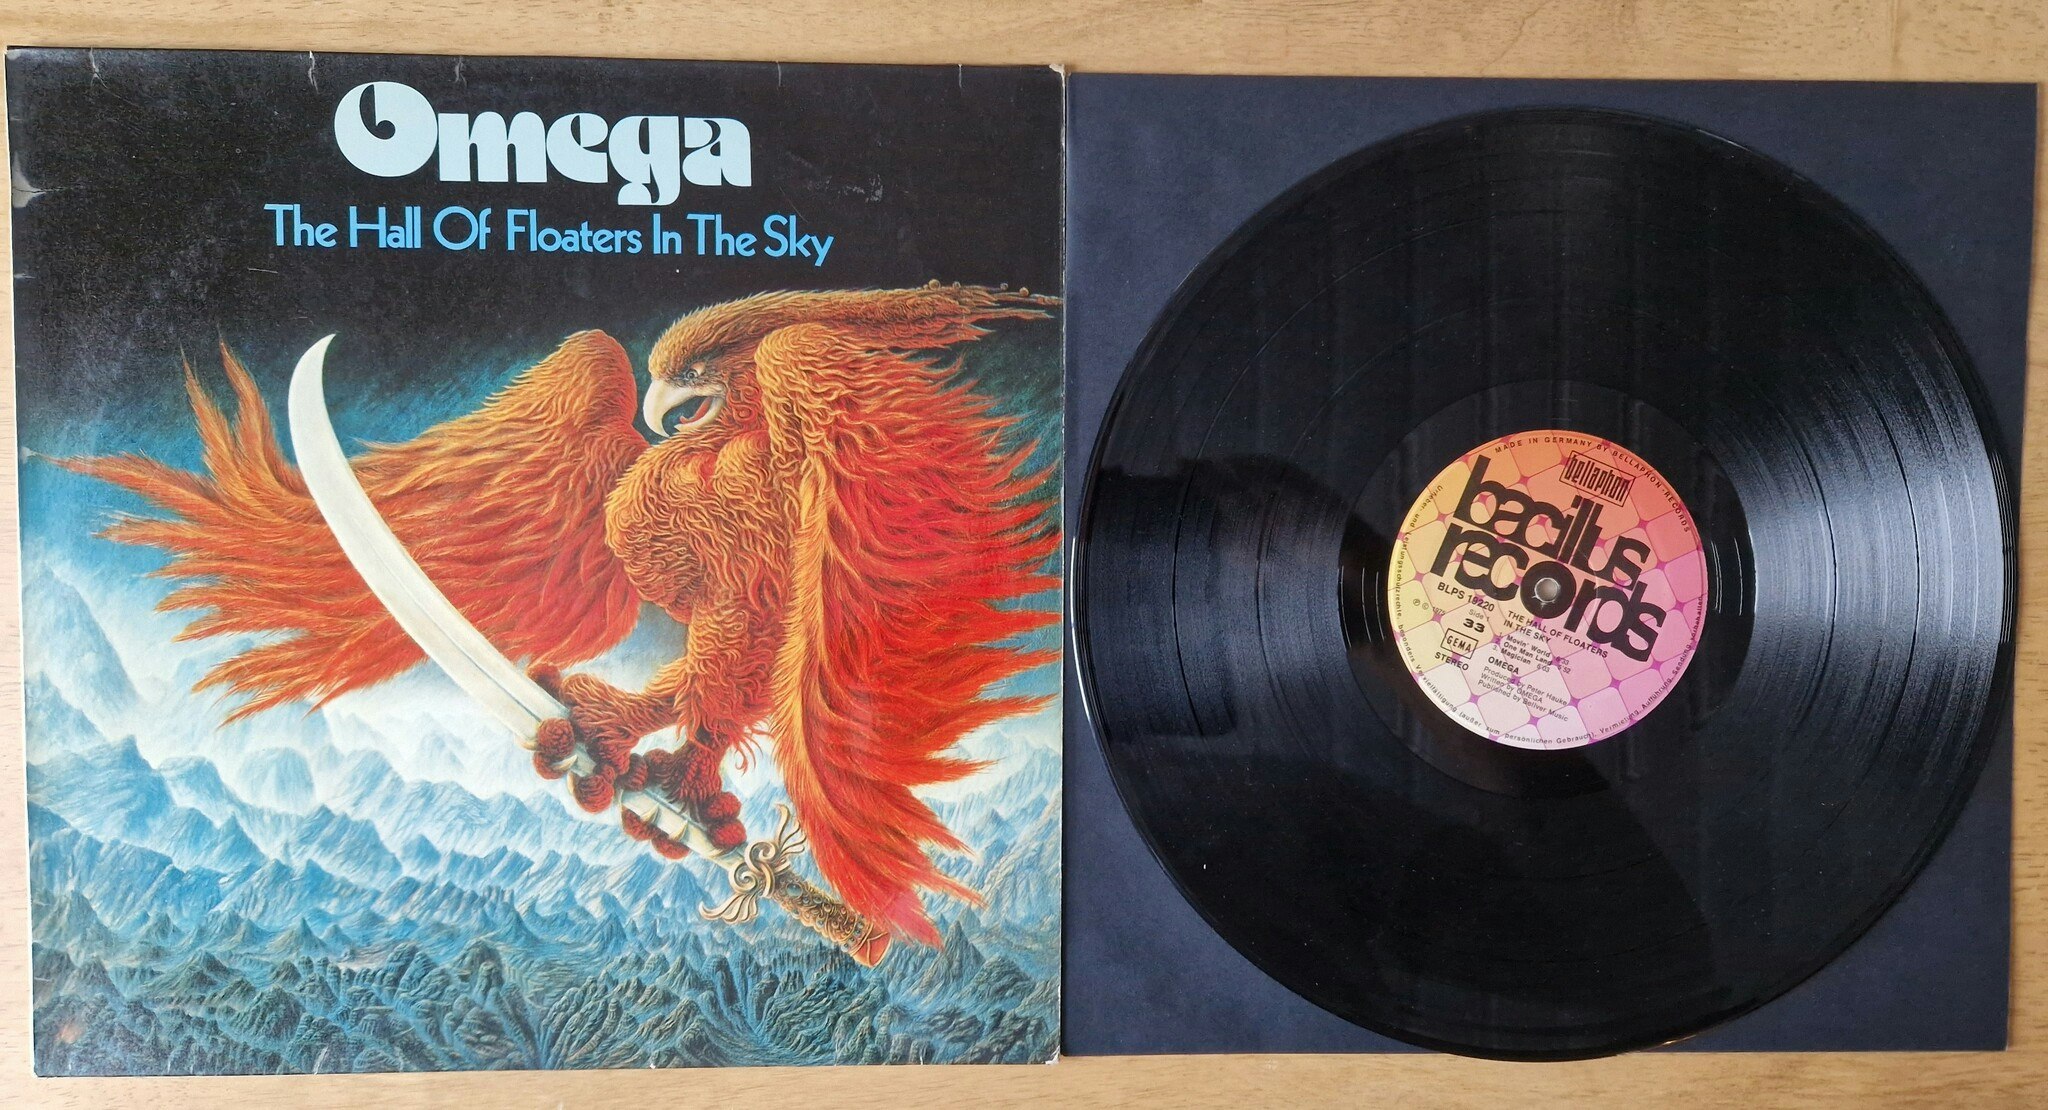 Kopia Omega, The hall of floaters in the sky. Vinyl LP